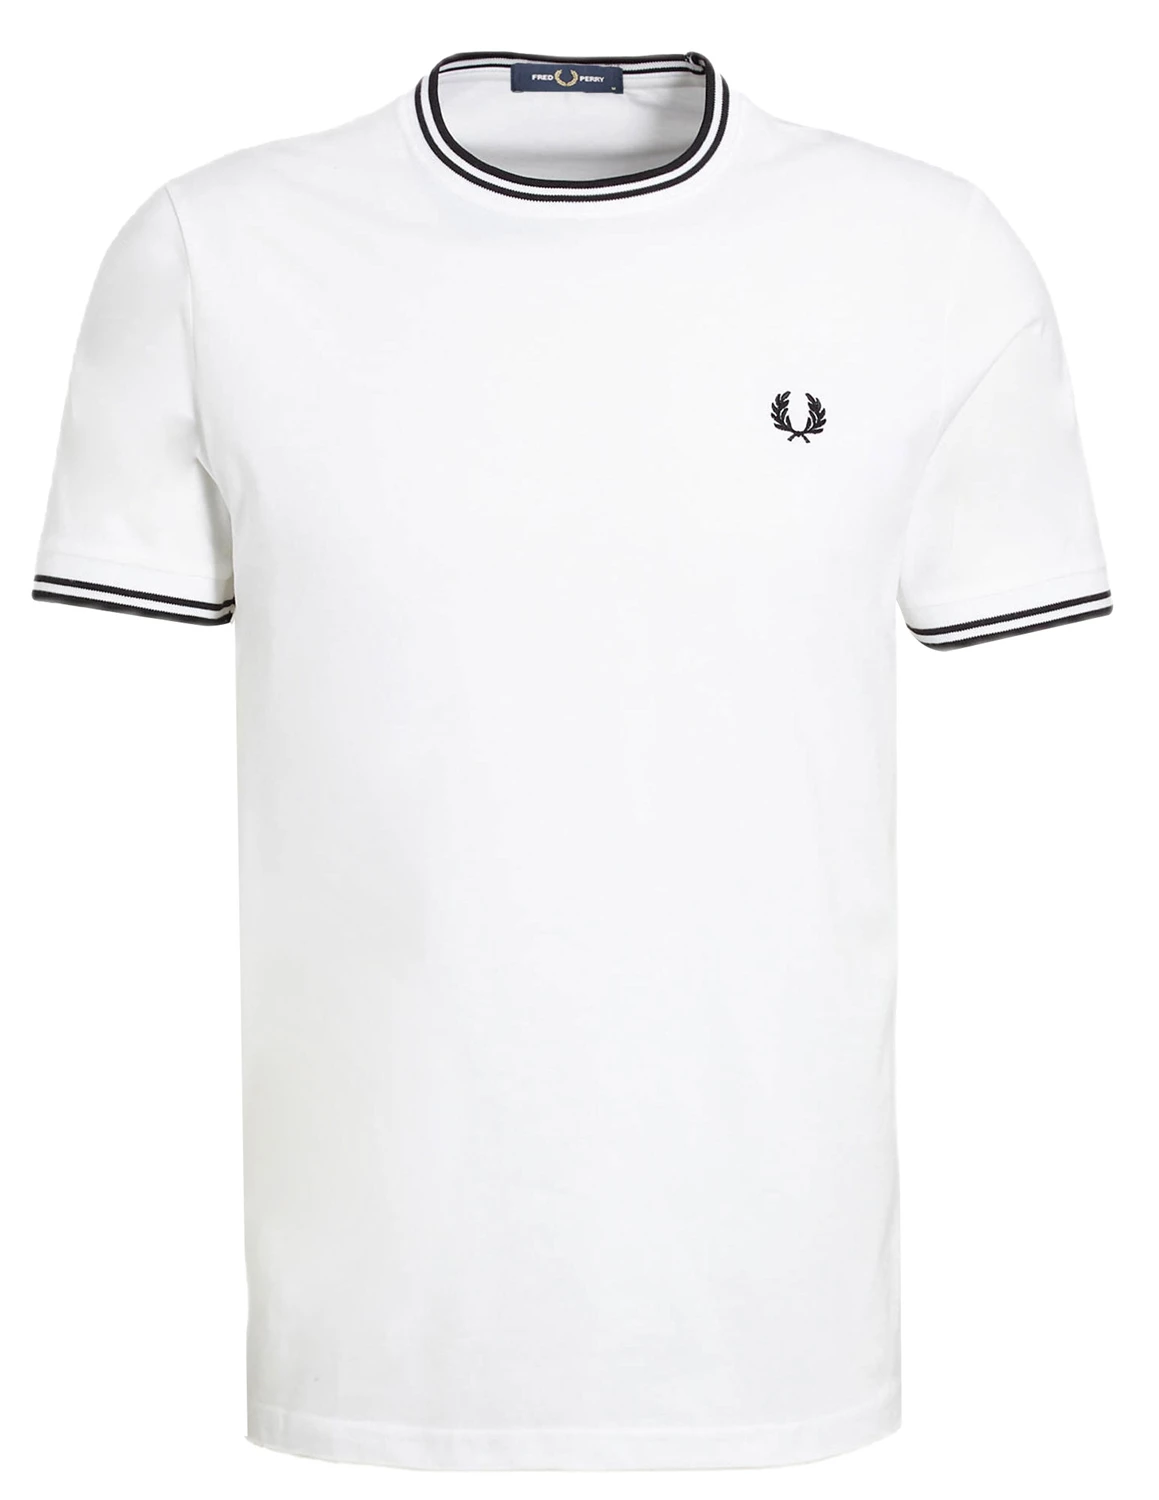 Extractie cabine accu Fred Perry Twin Tipped T-Shirt M1588 wit kopen bij The Stone